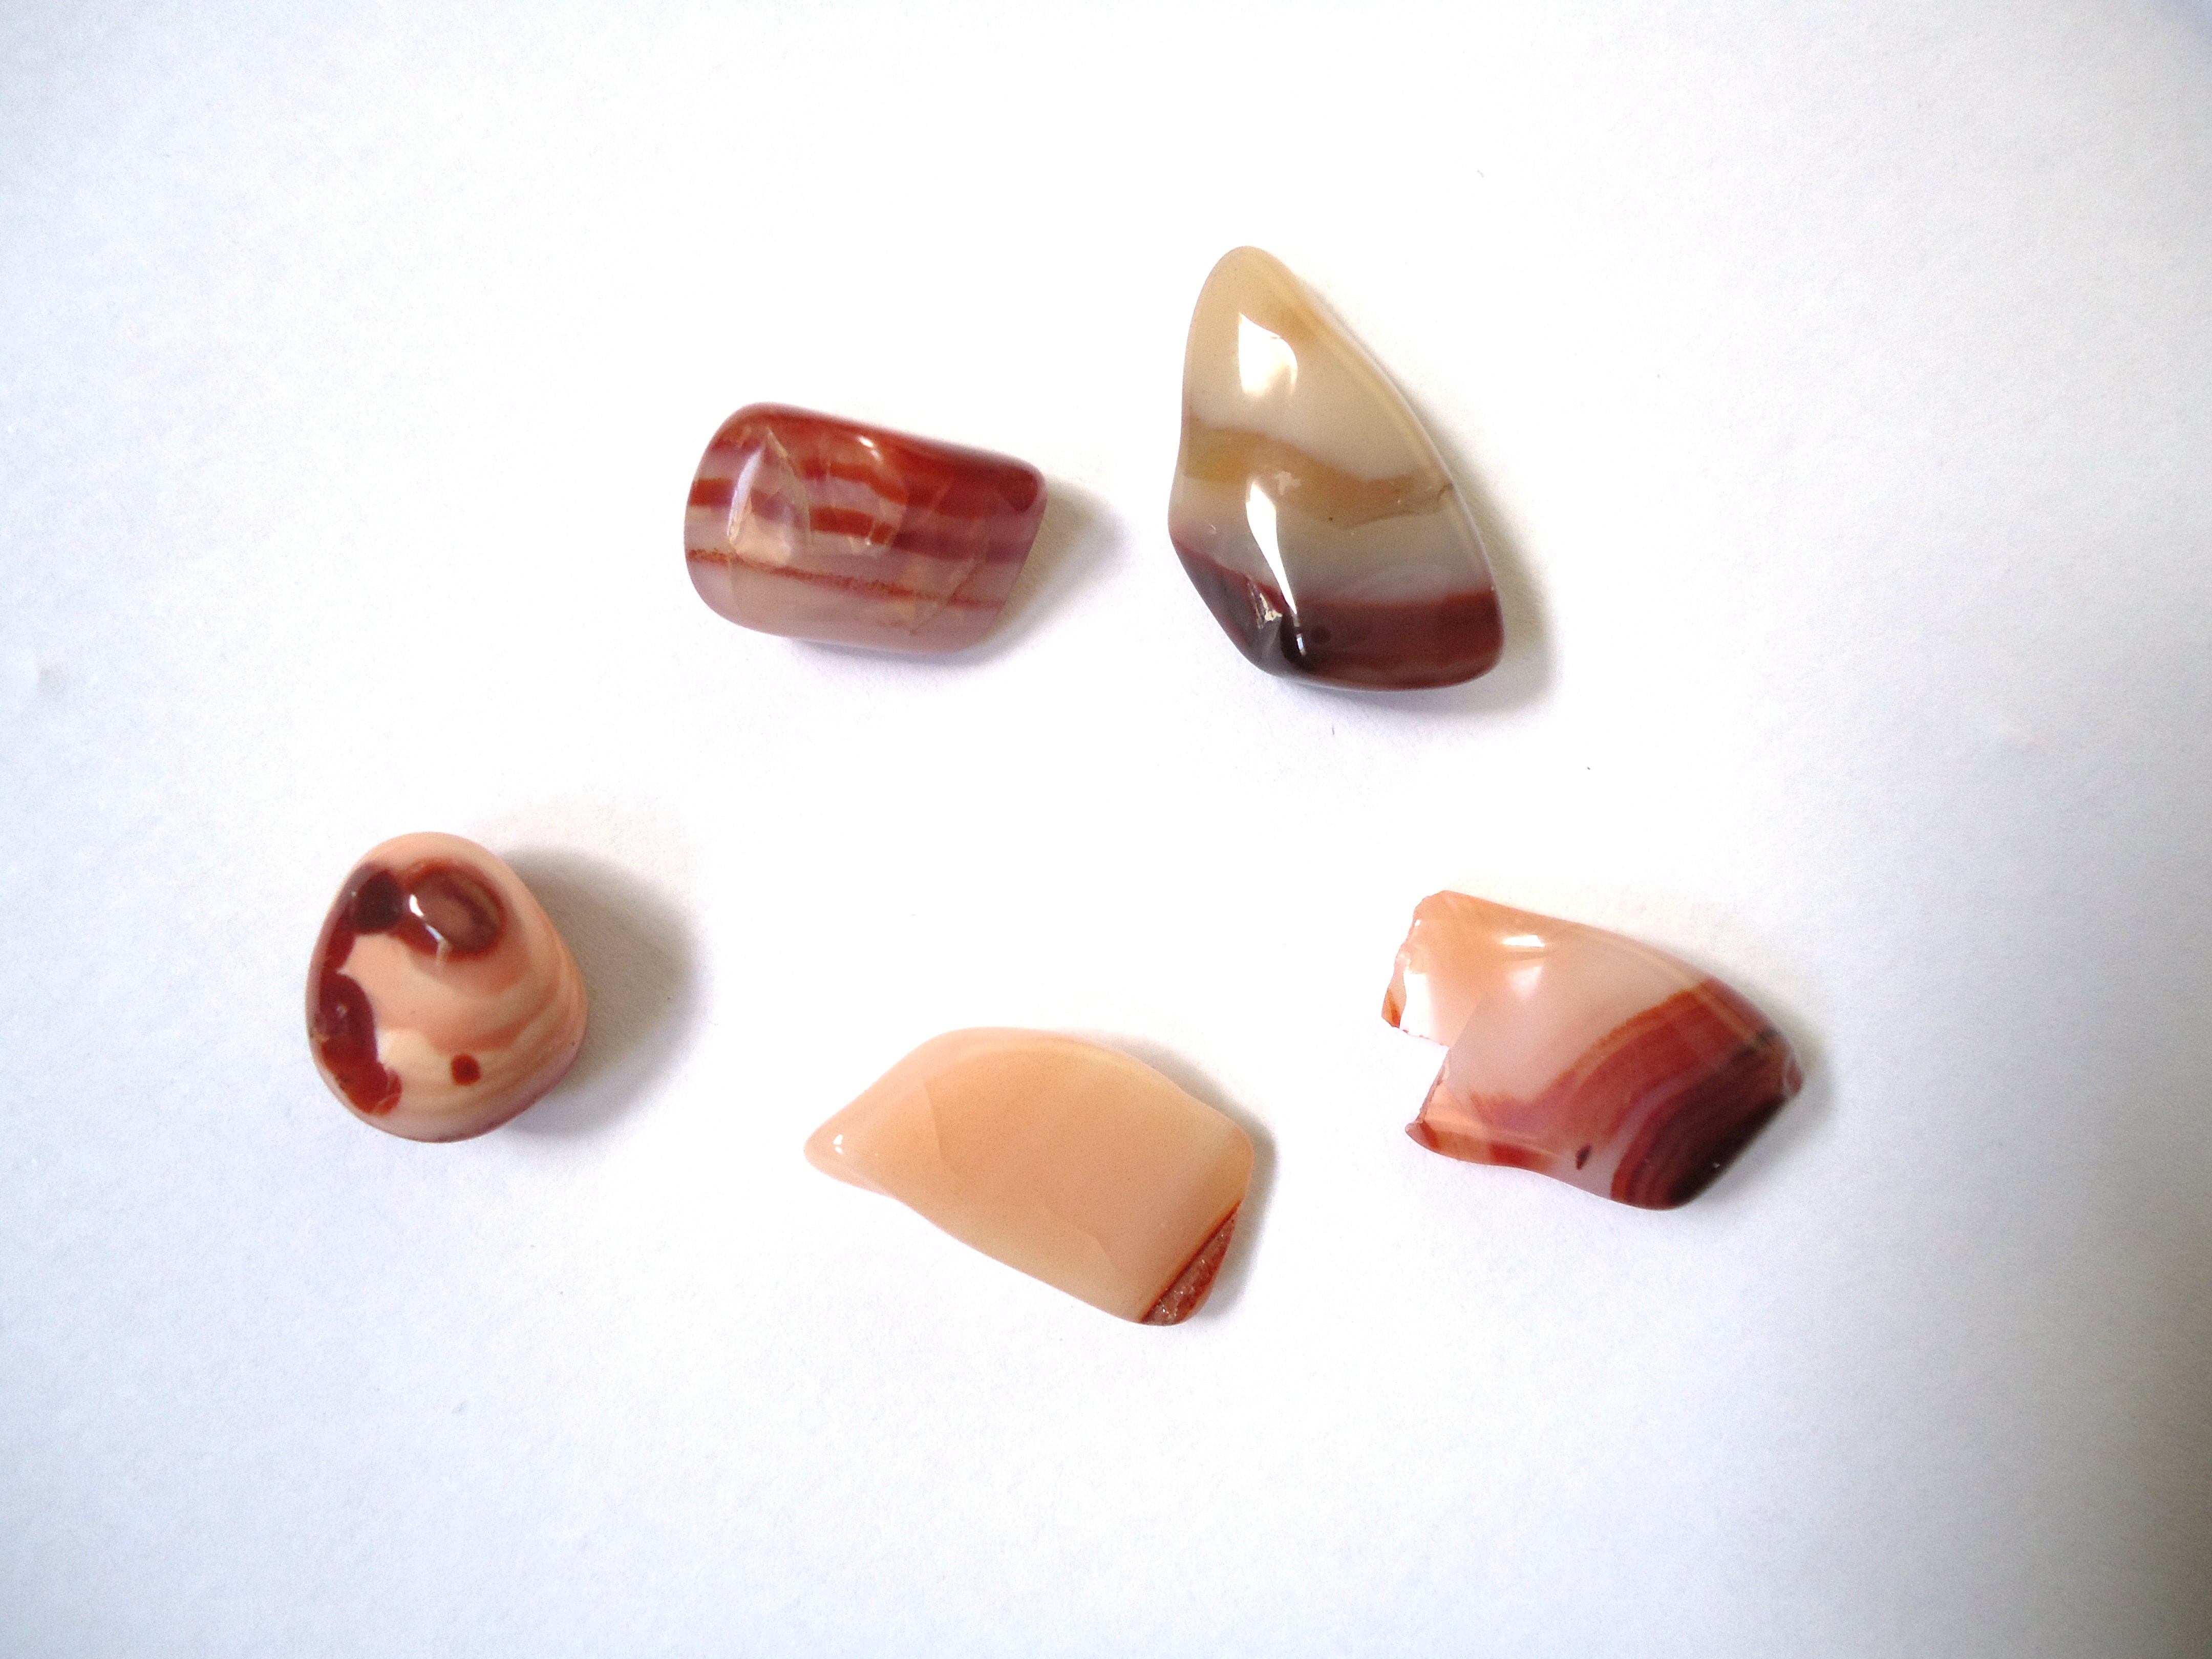 5 agate fragments